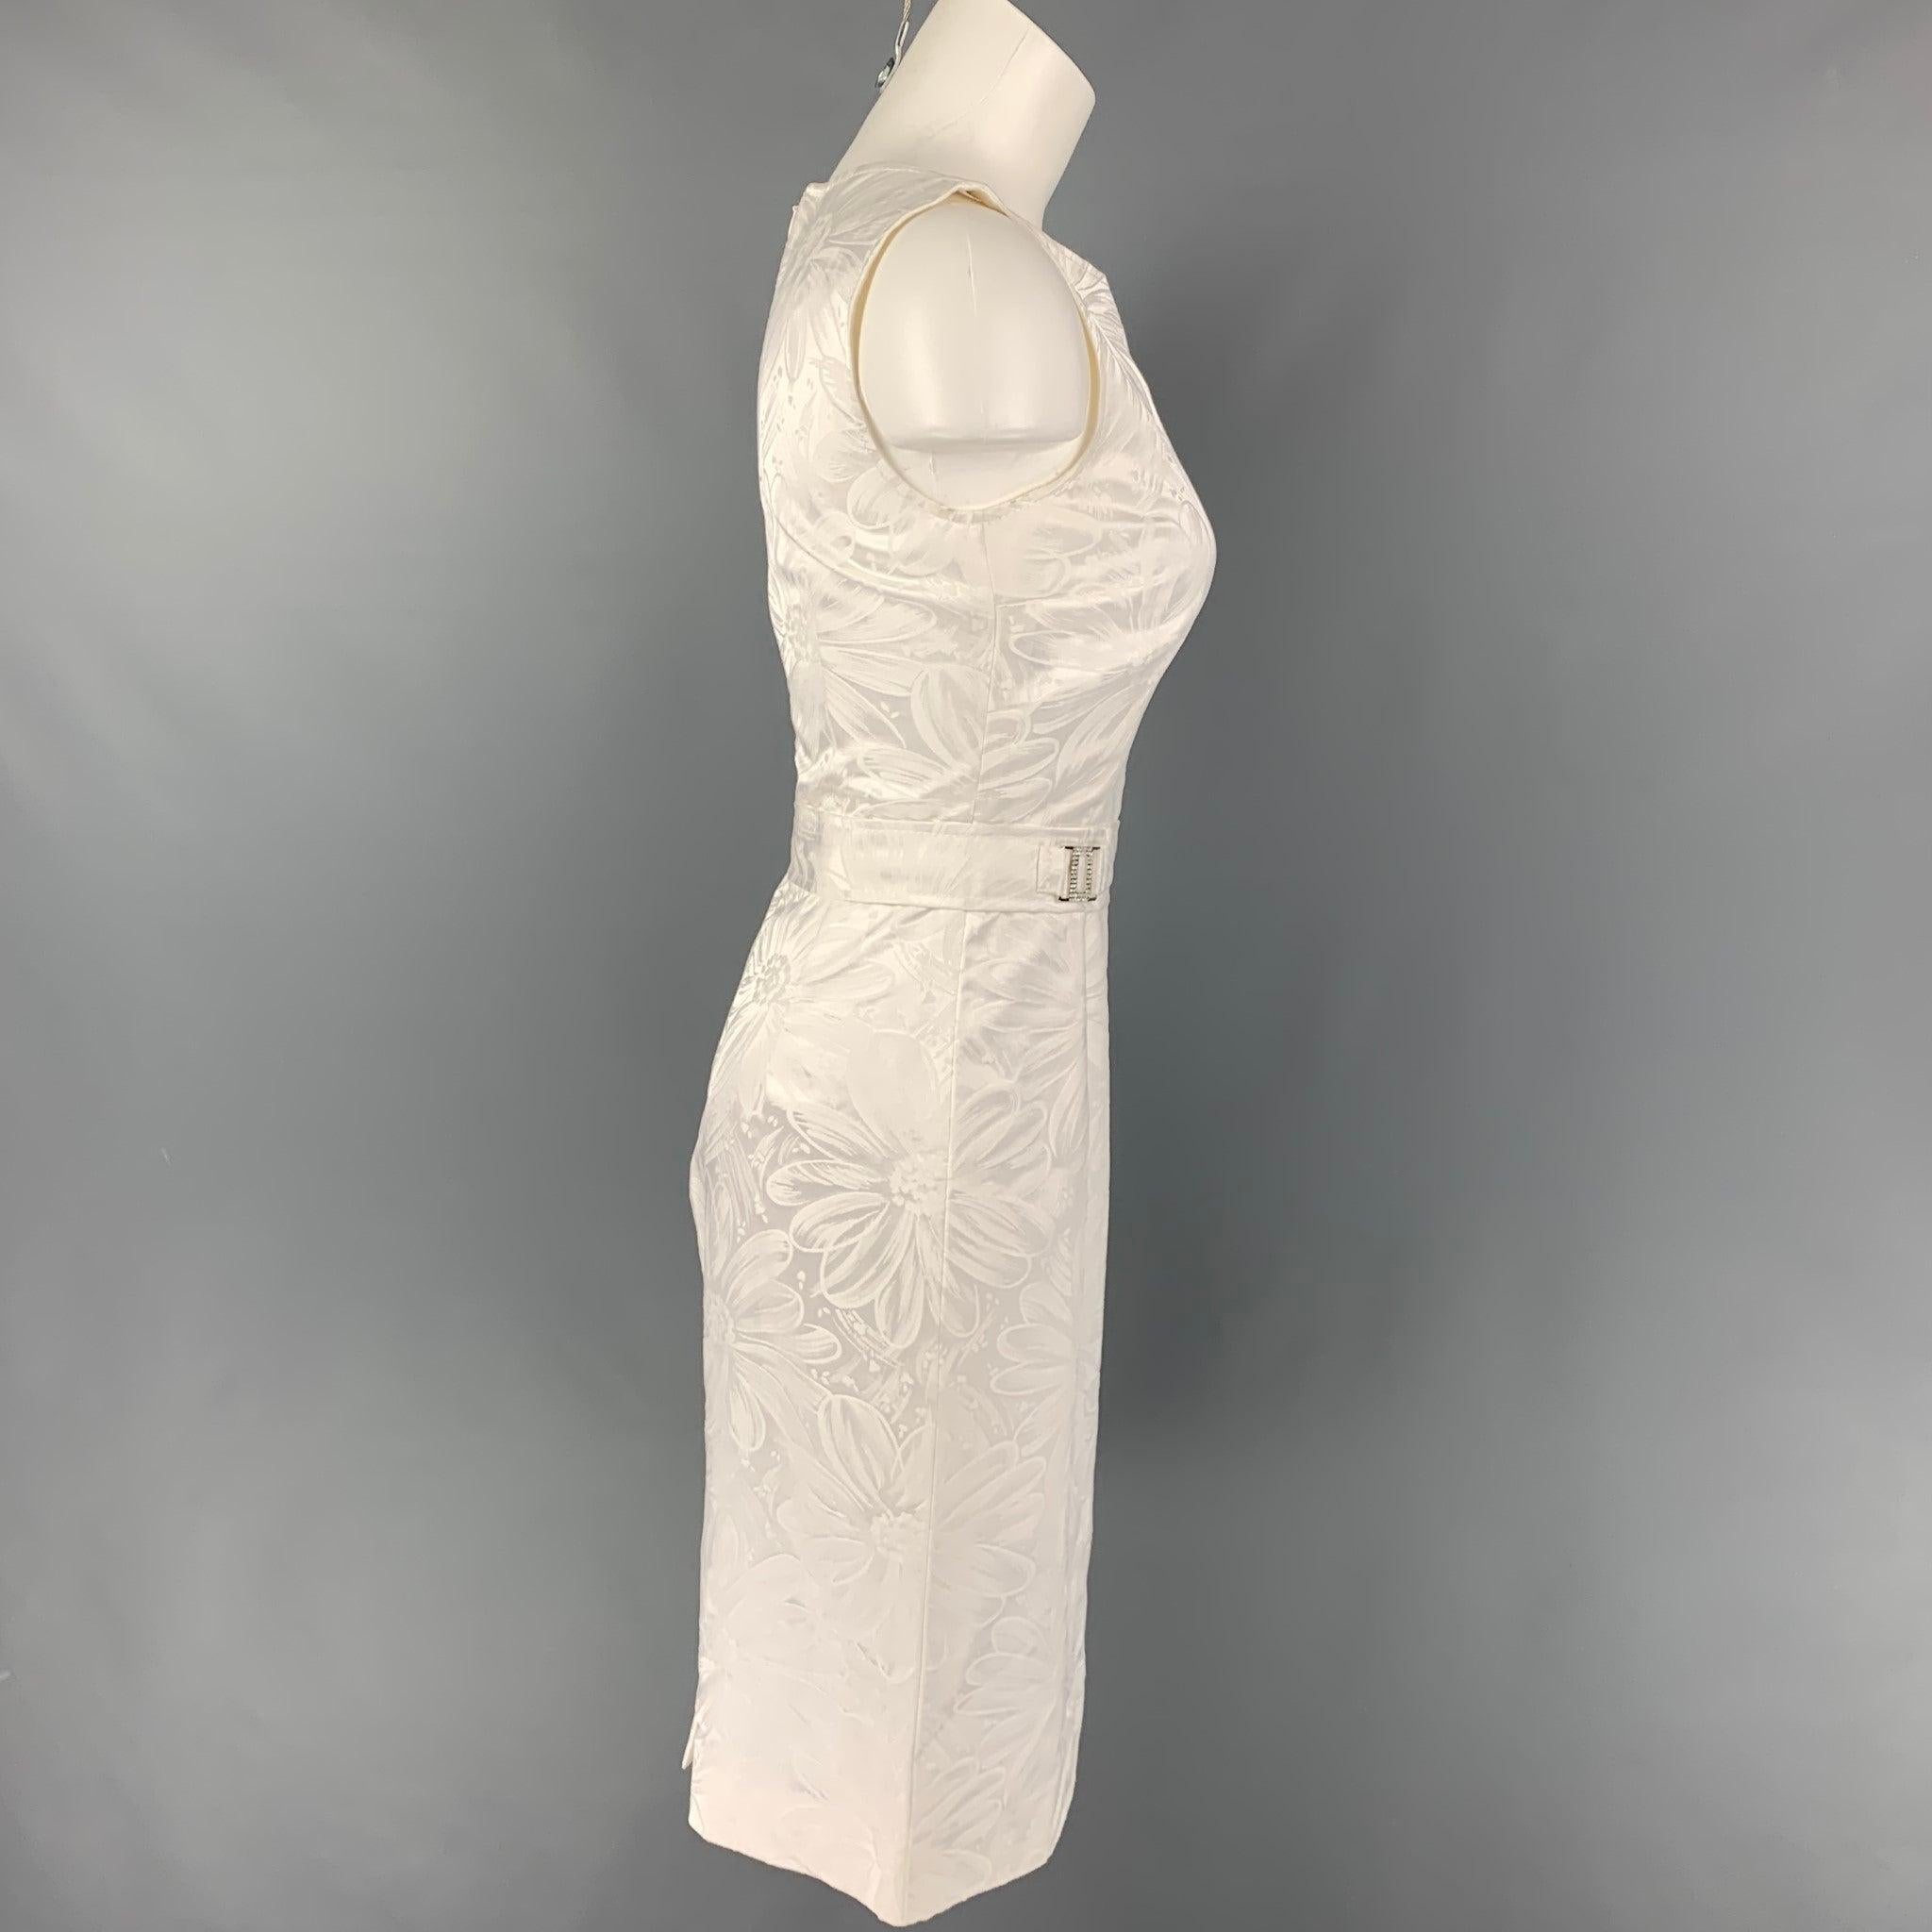 DOLCE & GABBANA Size 4 White Cotton Floral Viscose Rhinestone Sleeveless Dress In Good Condition For Sale In San Francisco, CA